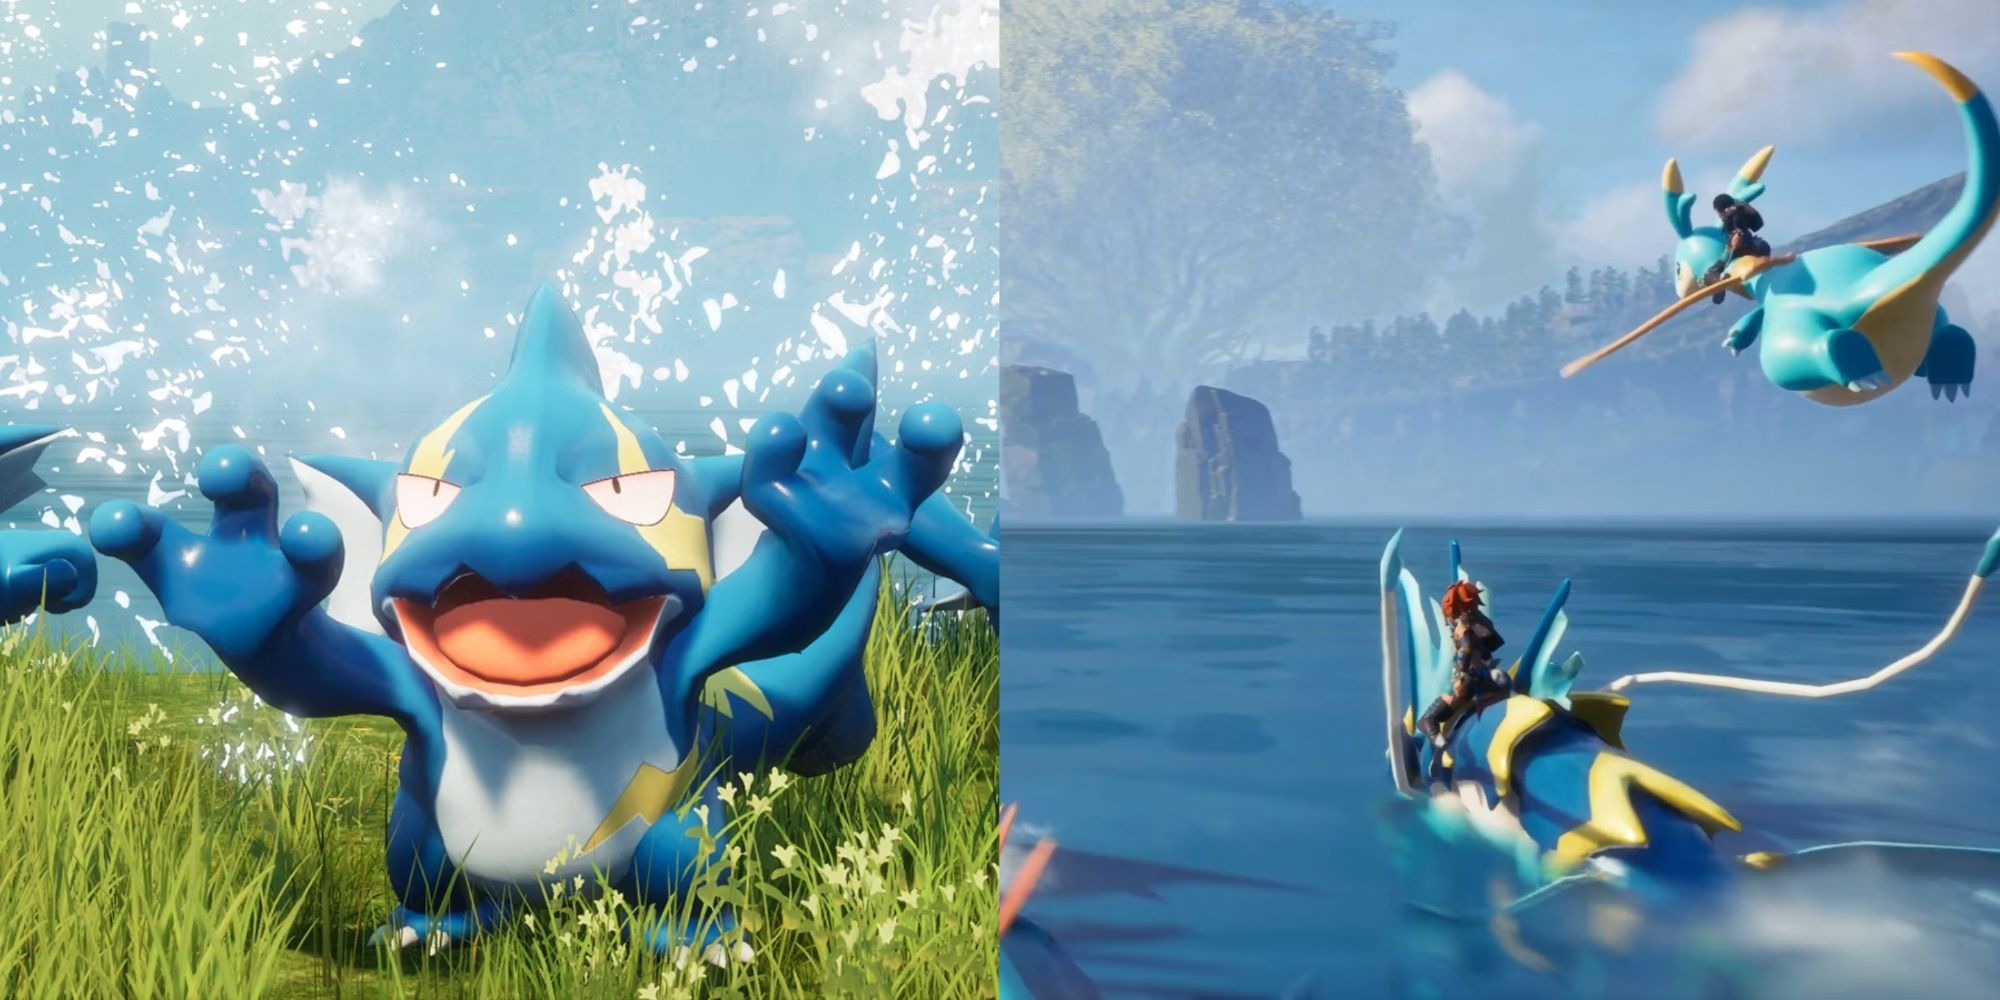 Palworld Gobfin throwing water on the left with players travelling on pals on the right